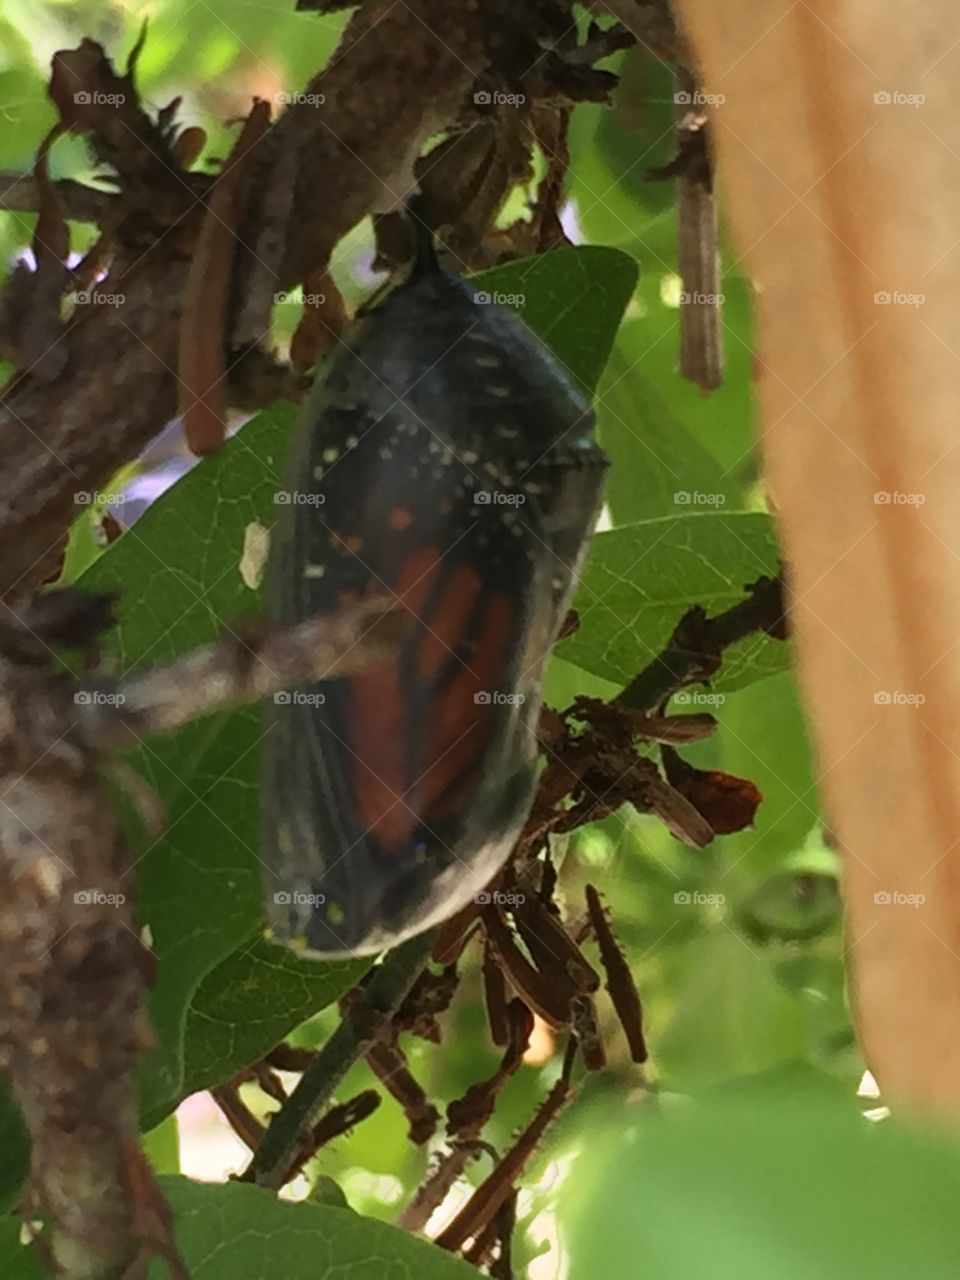 Monarch chrysalis getting ready to open